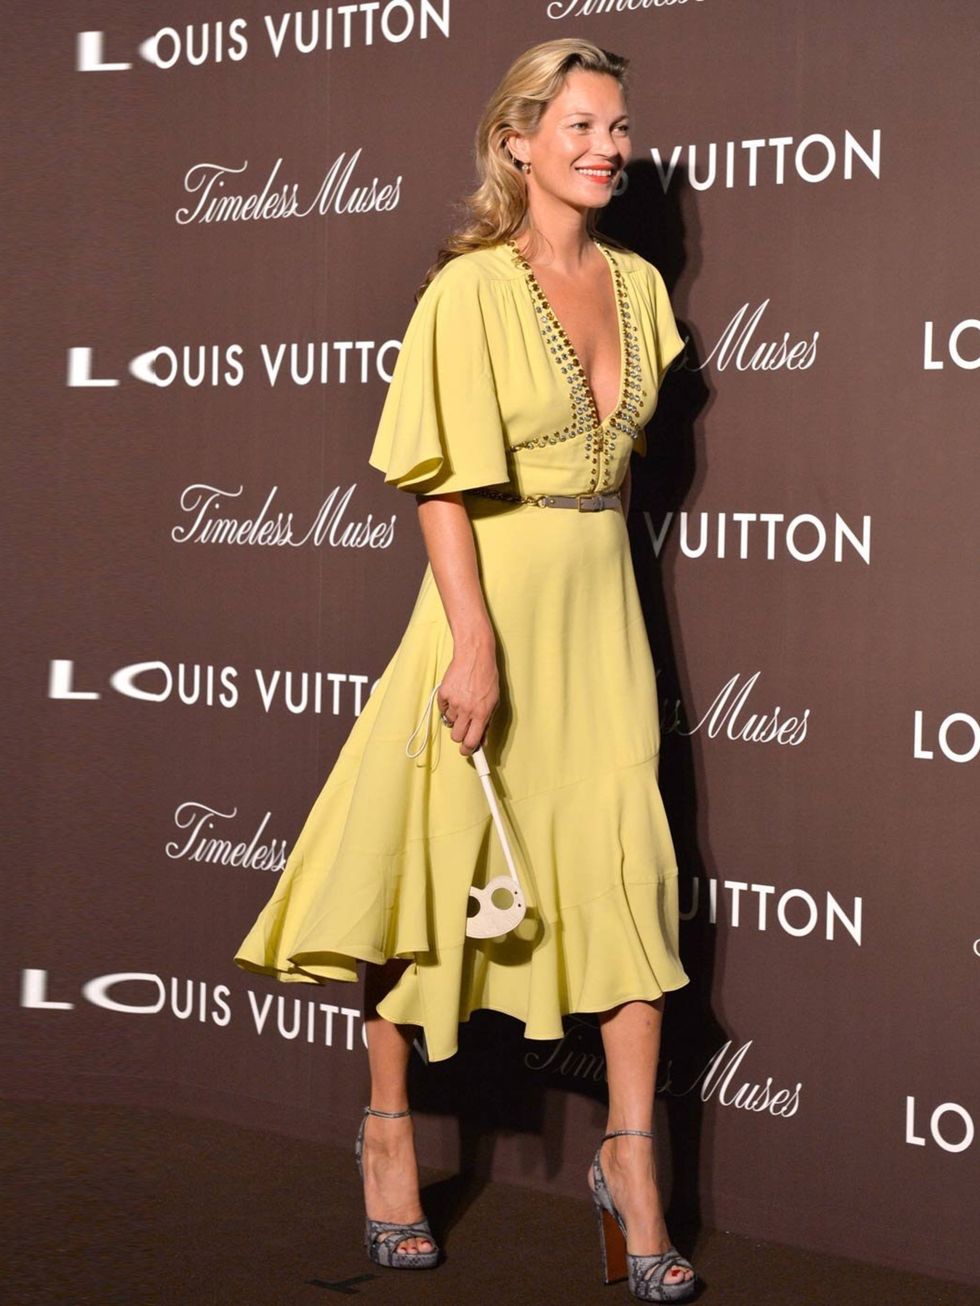 <p>Kate Moss wearing a soft-yellow Louis Vuitton Resort 2014 dress styled with Louis Vuitton pouch and grey Louis Vuitton heels from the Autumn 2013 collection, attends the Louis Vuitton 'Timeless Muses' exhibition at the Tokyo Station Hotel on August 29,